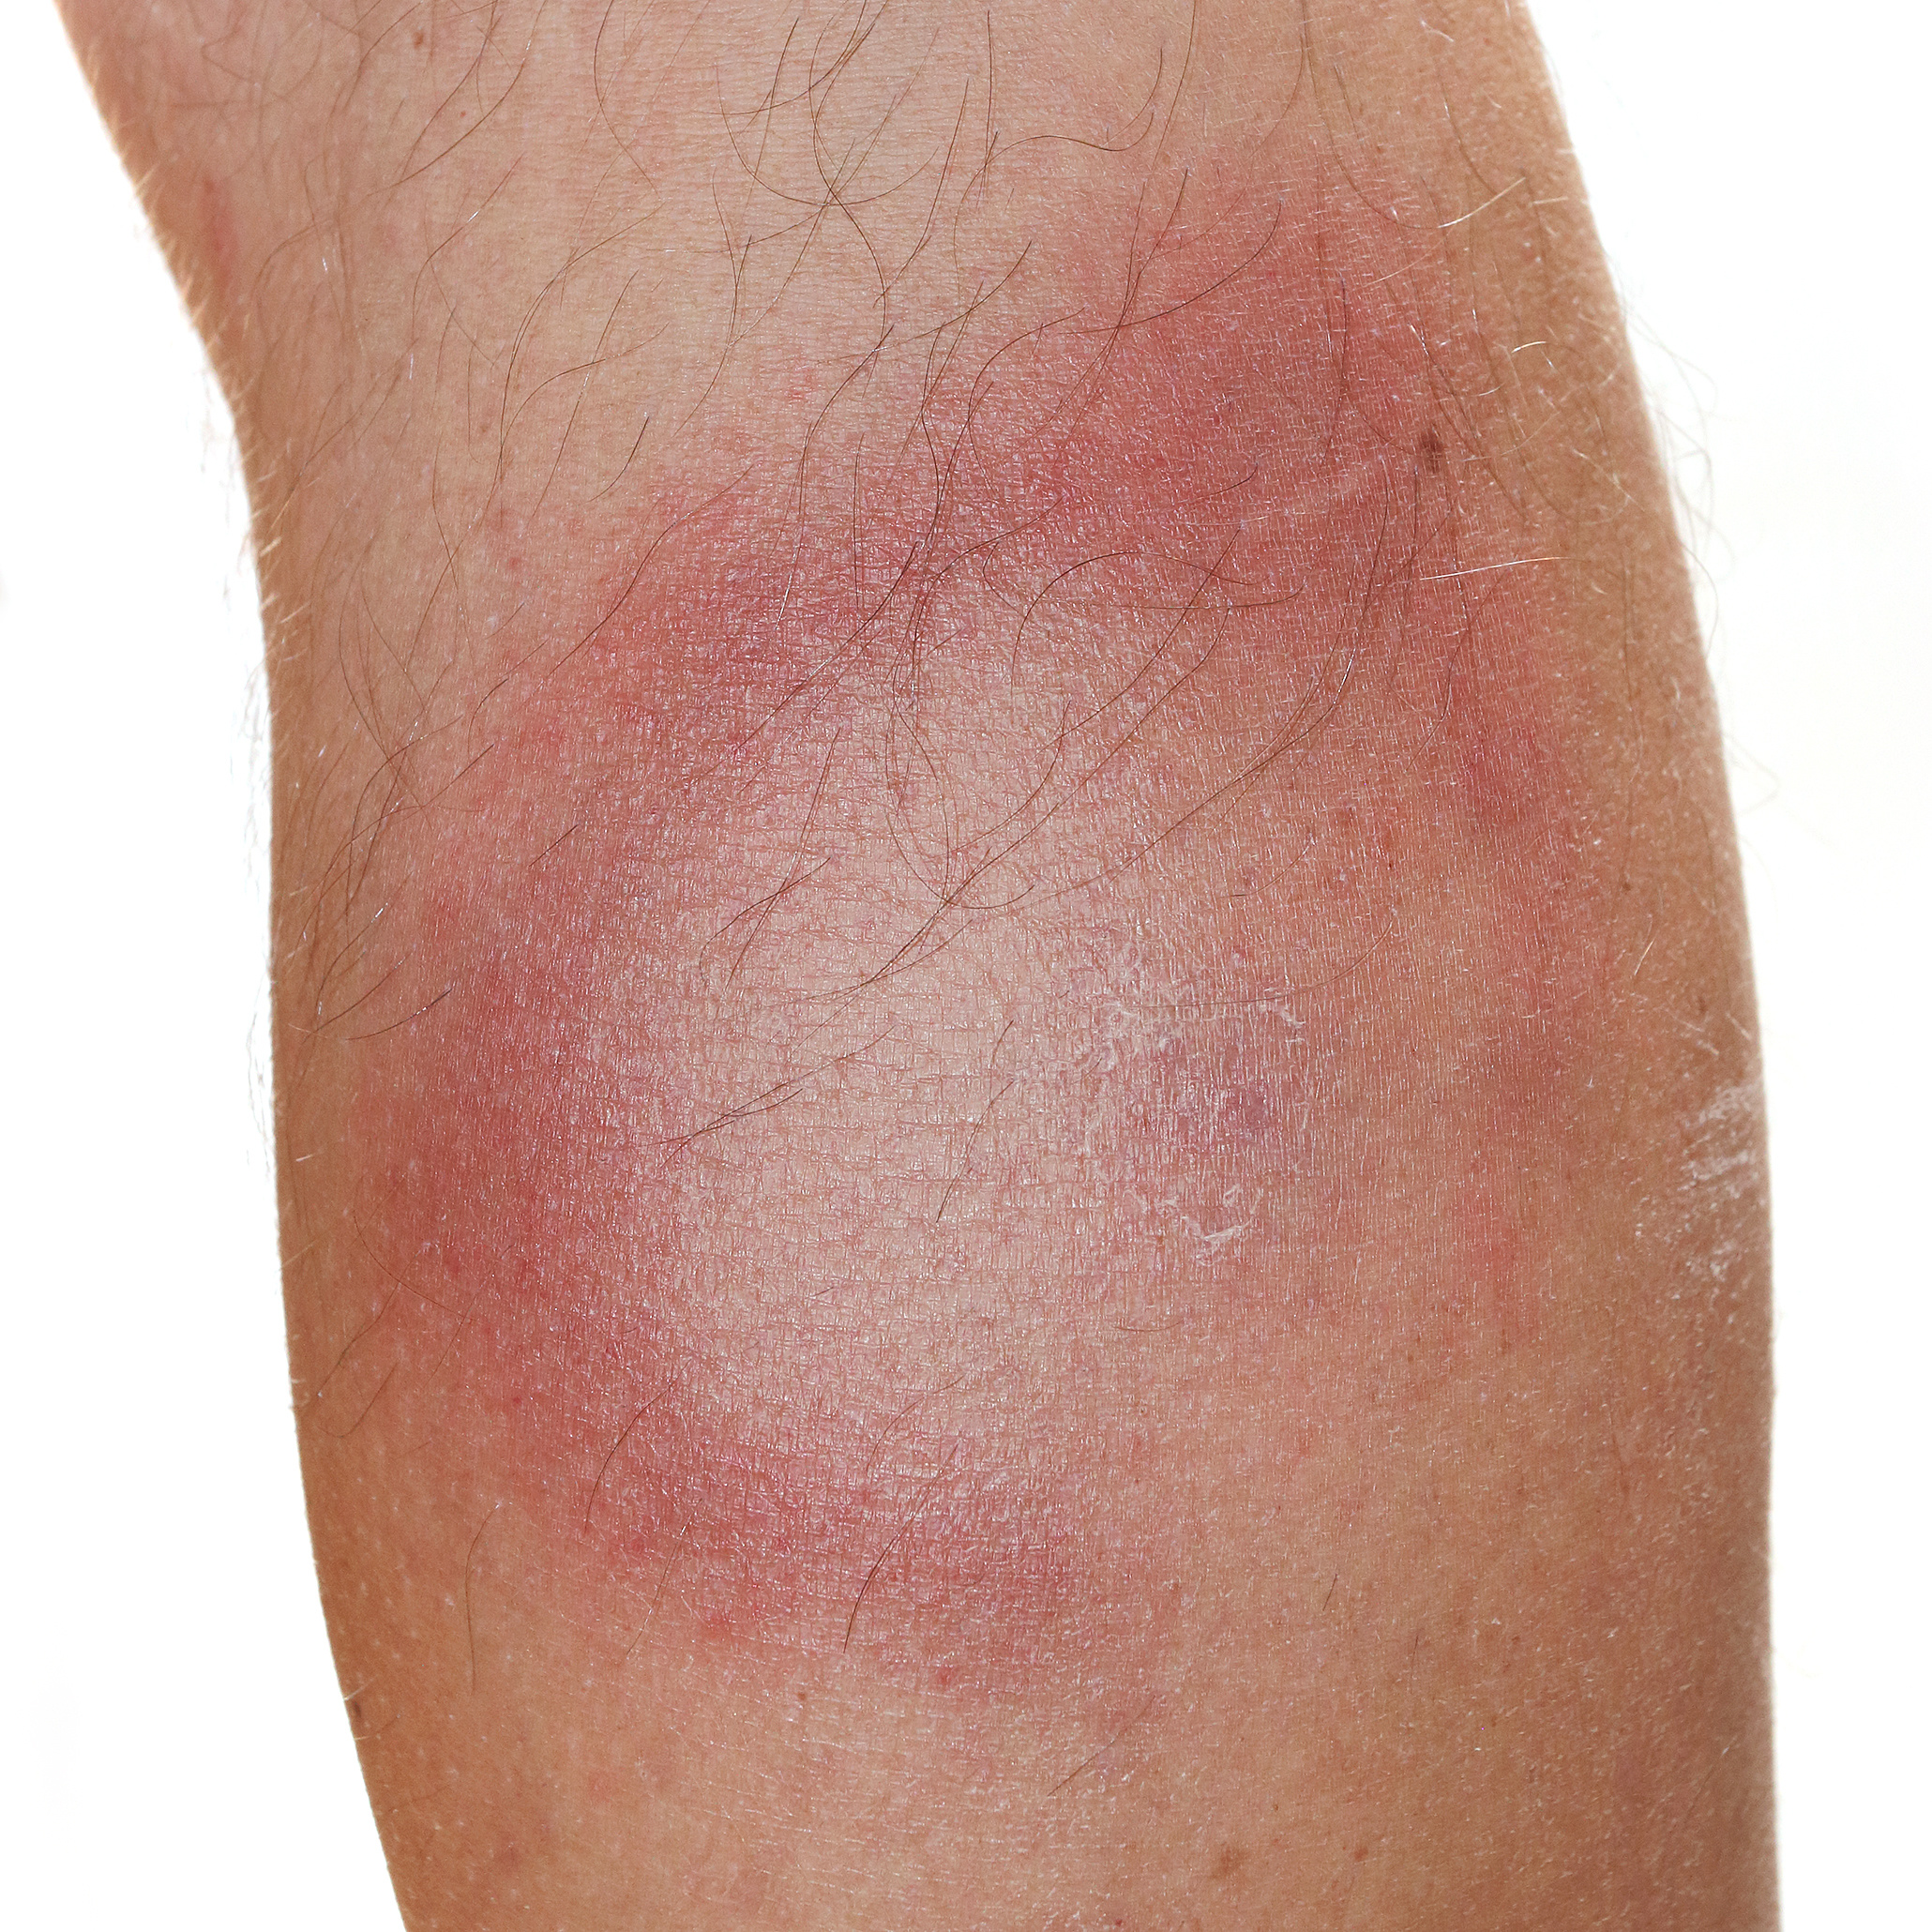 A red rash on a person's knee